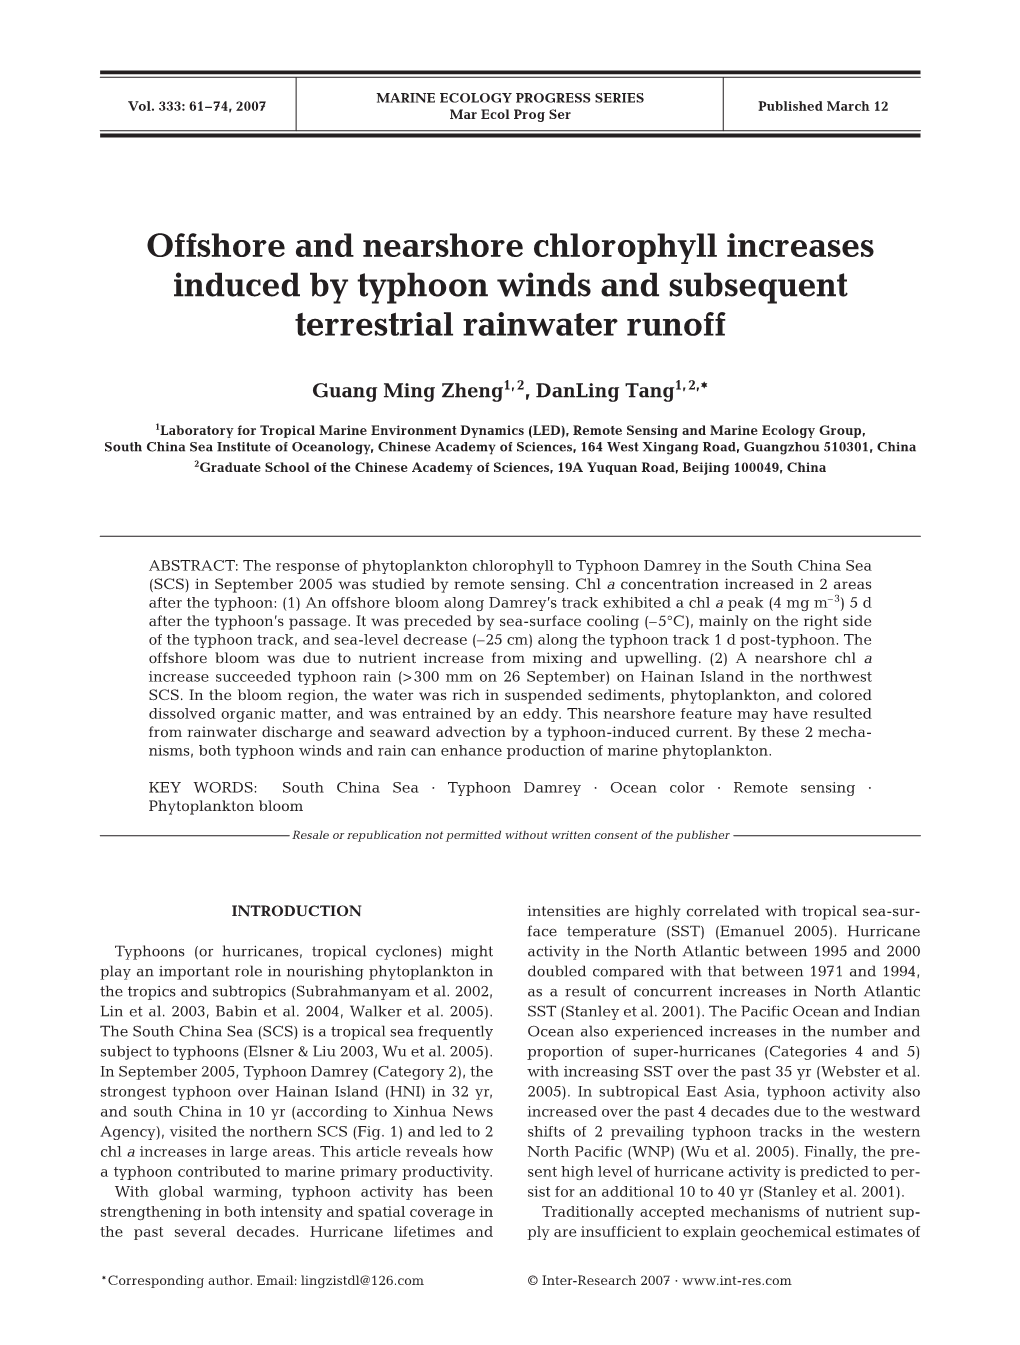 Offshore and Nearshore Chlorophyll Increases Induced by Typhoon Winds and Subsequent Terrestrial Rainwater Runoff